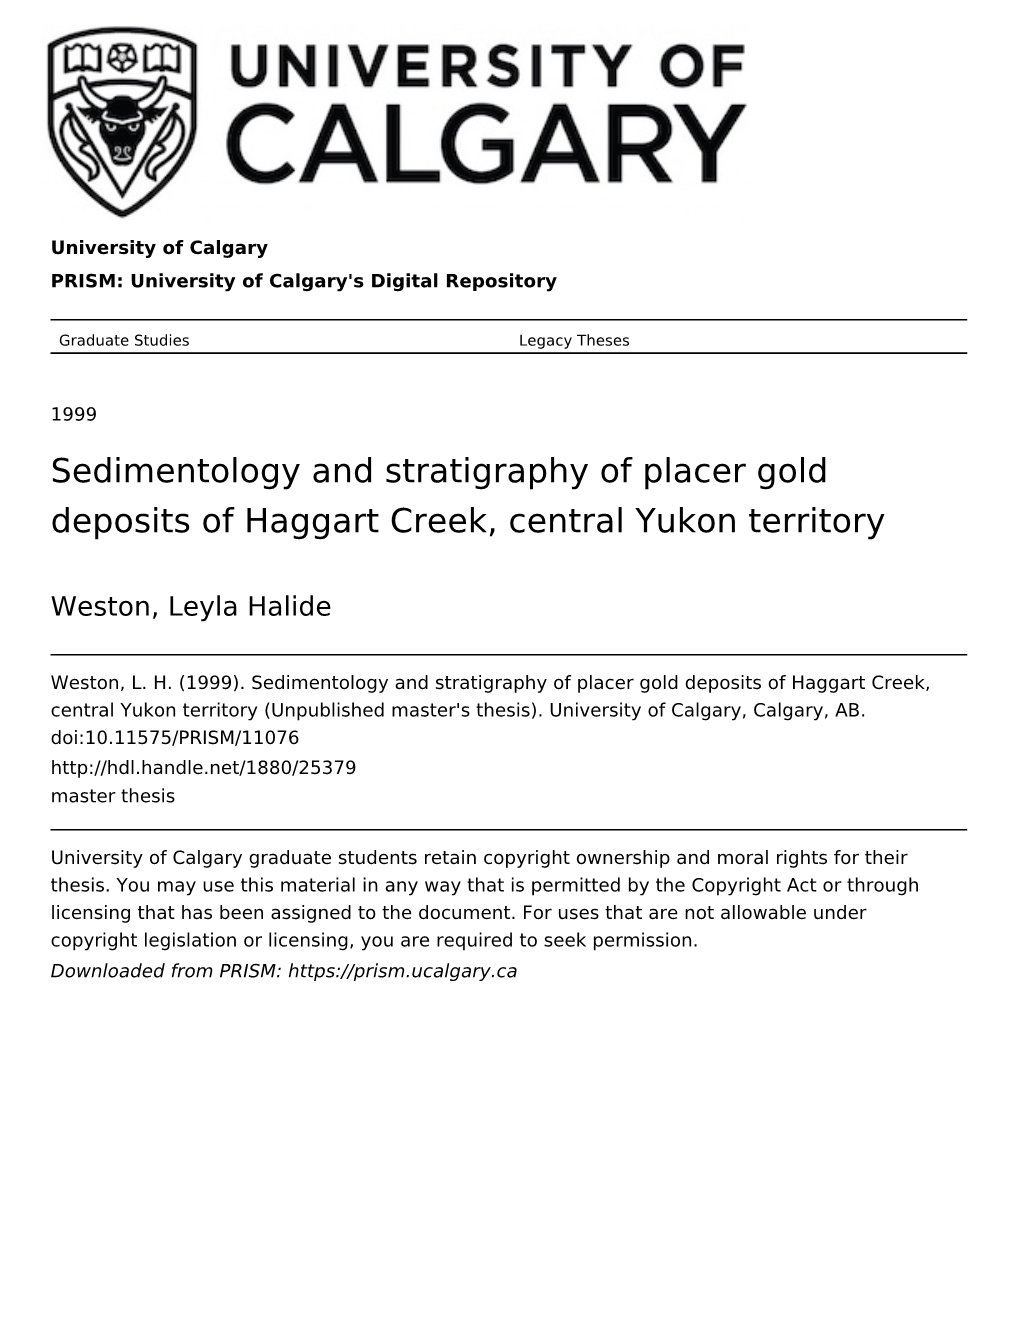 Sedimentology and Stratigraphy of Placer Gold Deposits of Haggart Creek, Central Yukon Territory